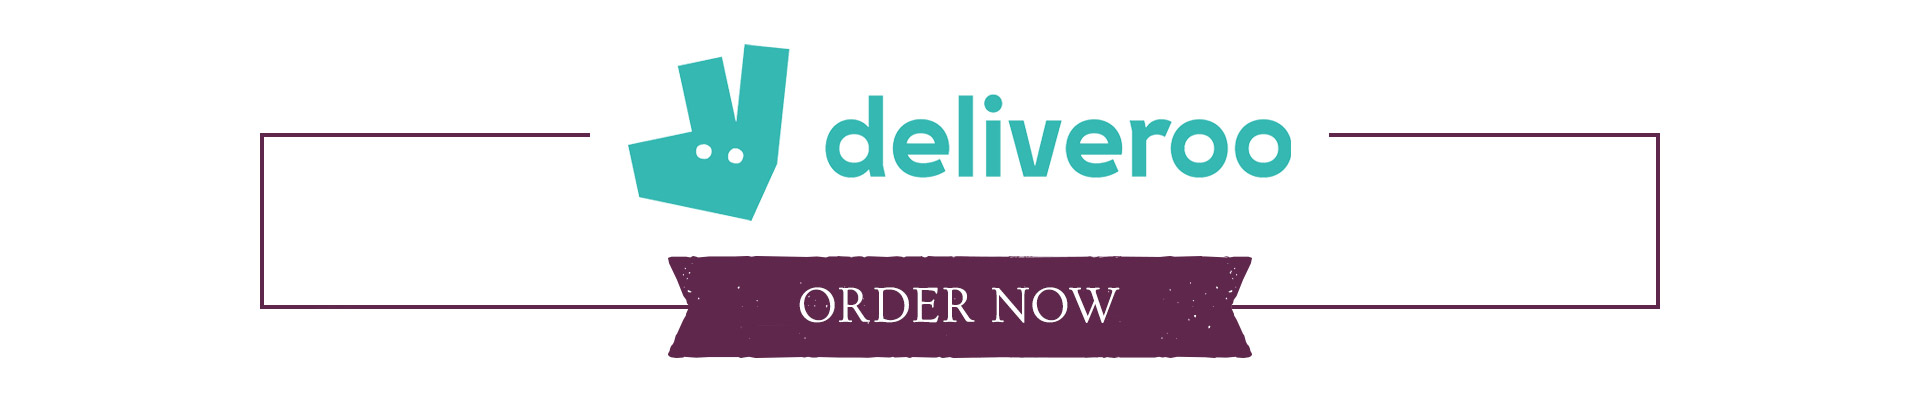 core-deliveroo-both-thin-banner.jpg